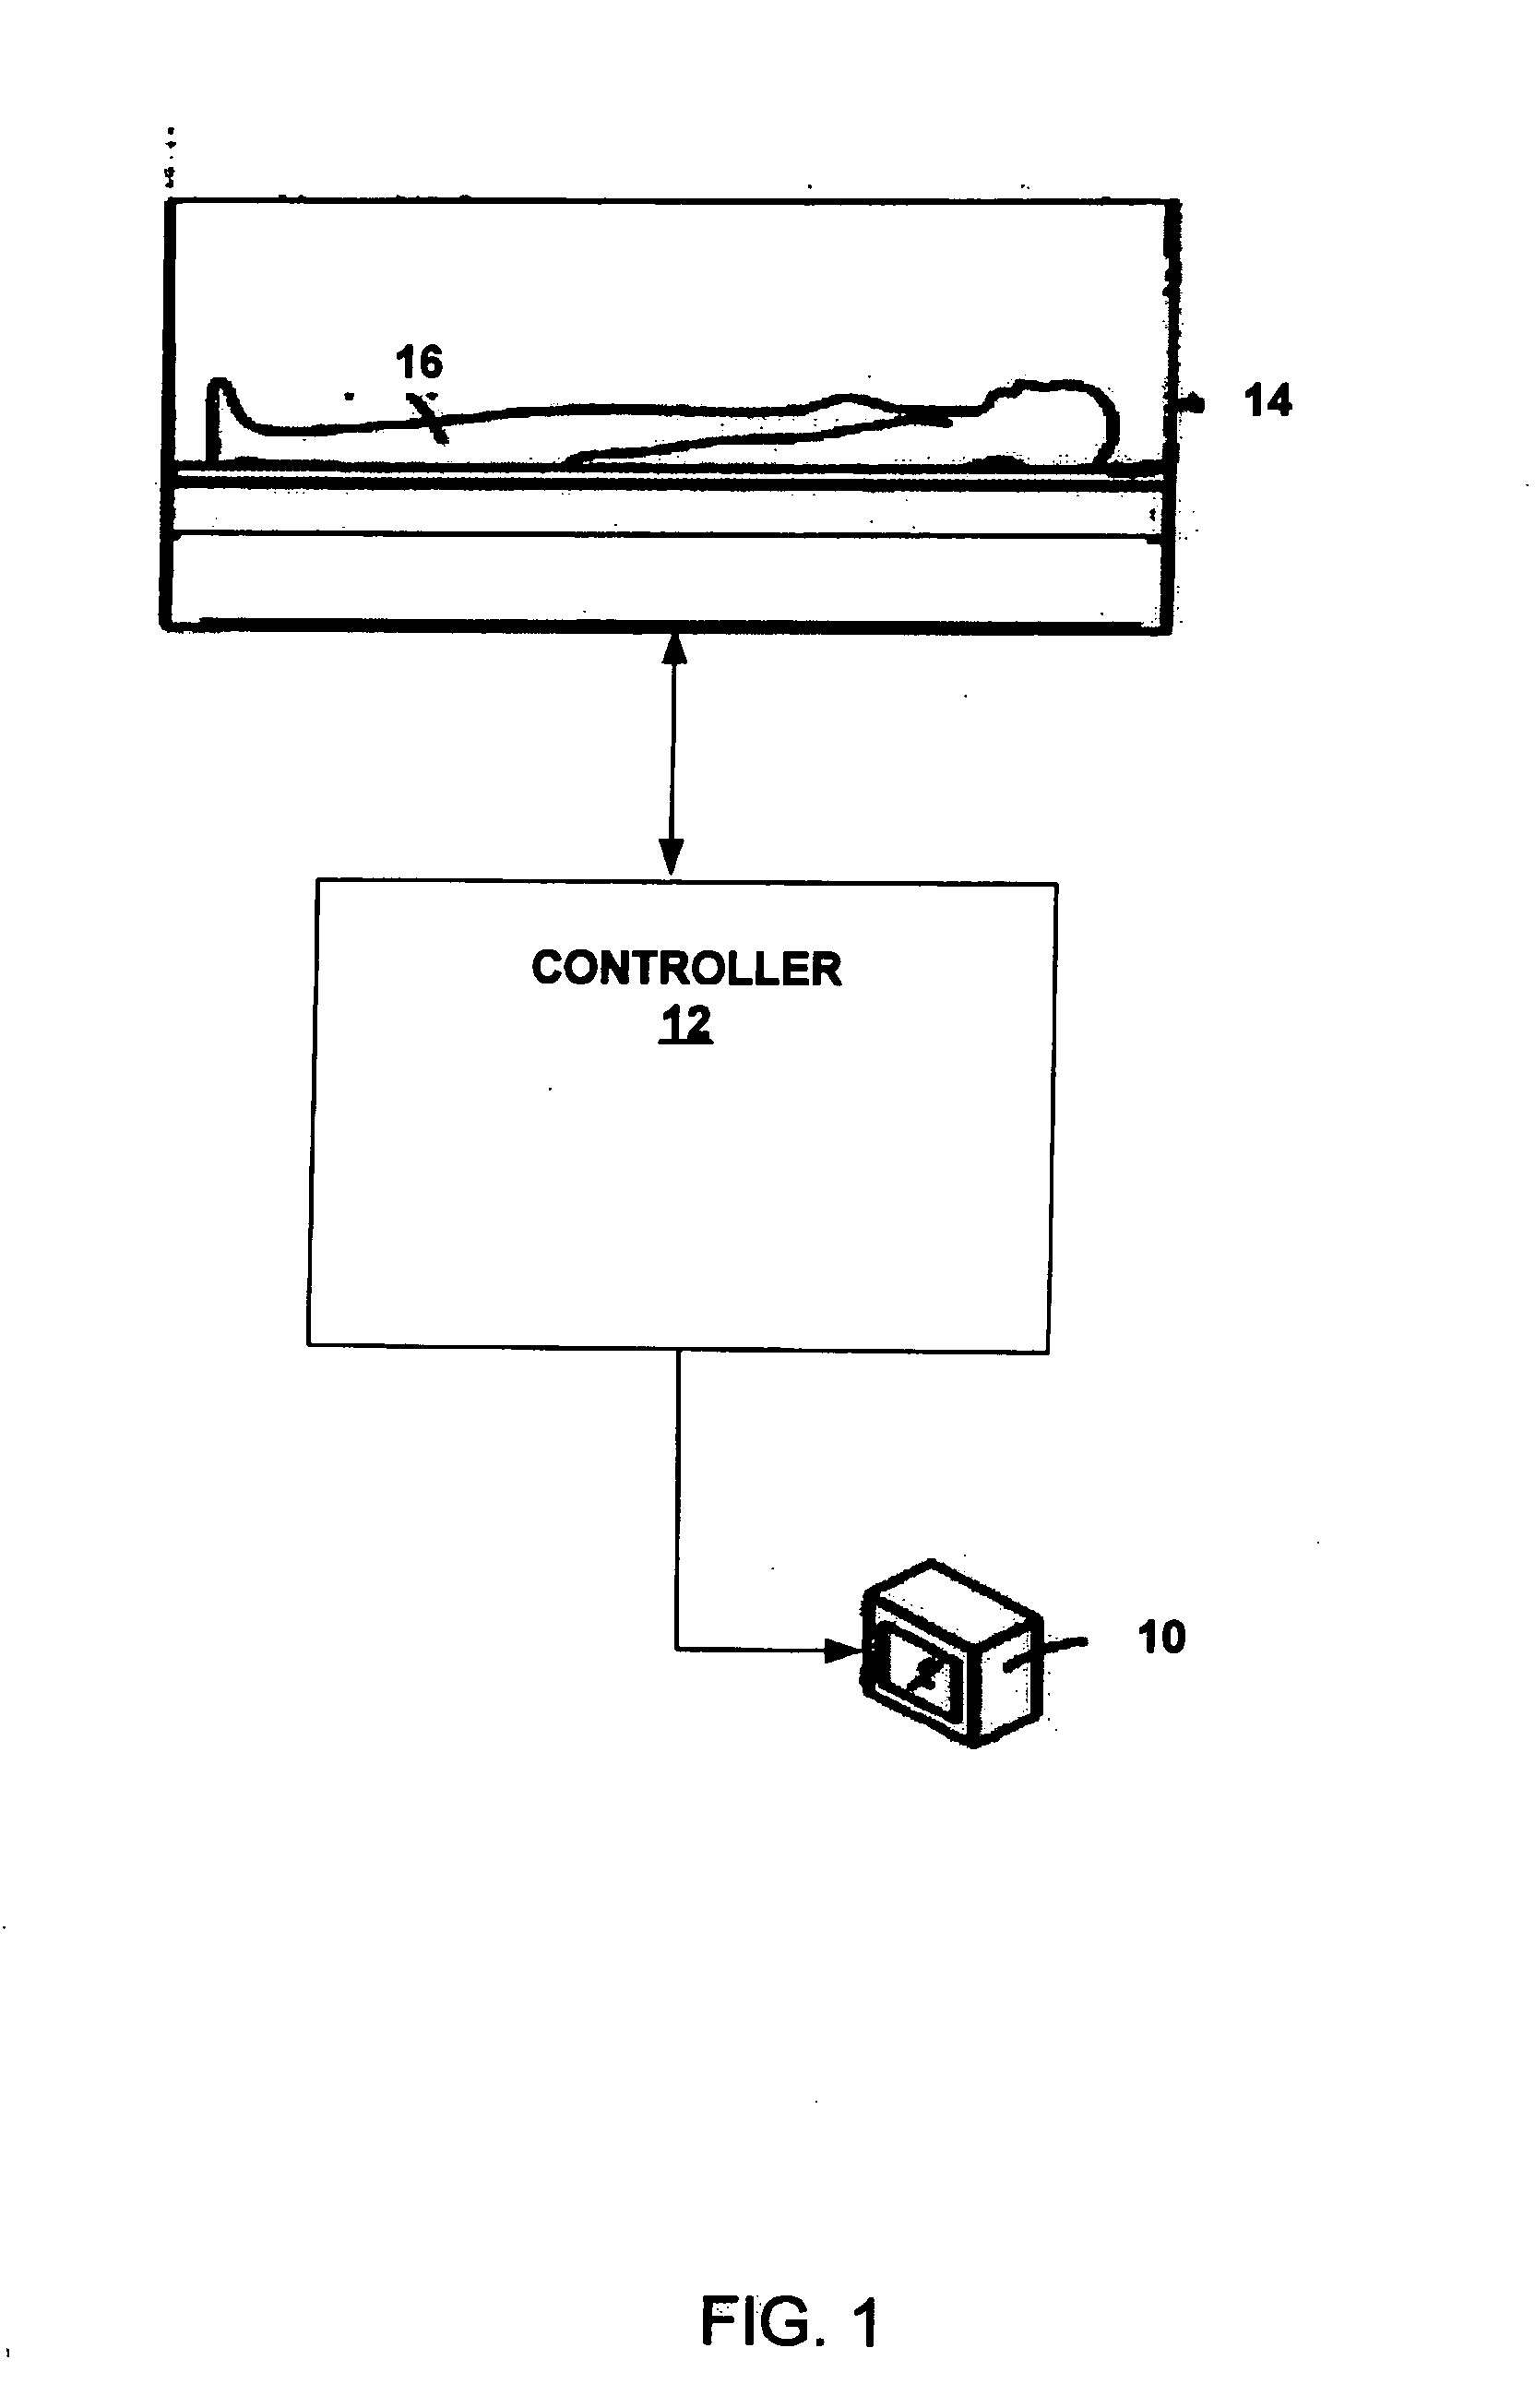 Method and system for improved image reconstruction and data collection for compton cameras